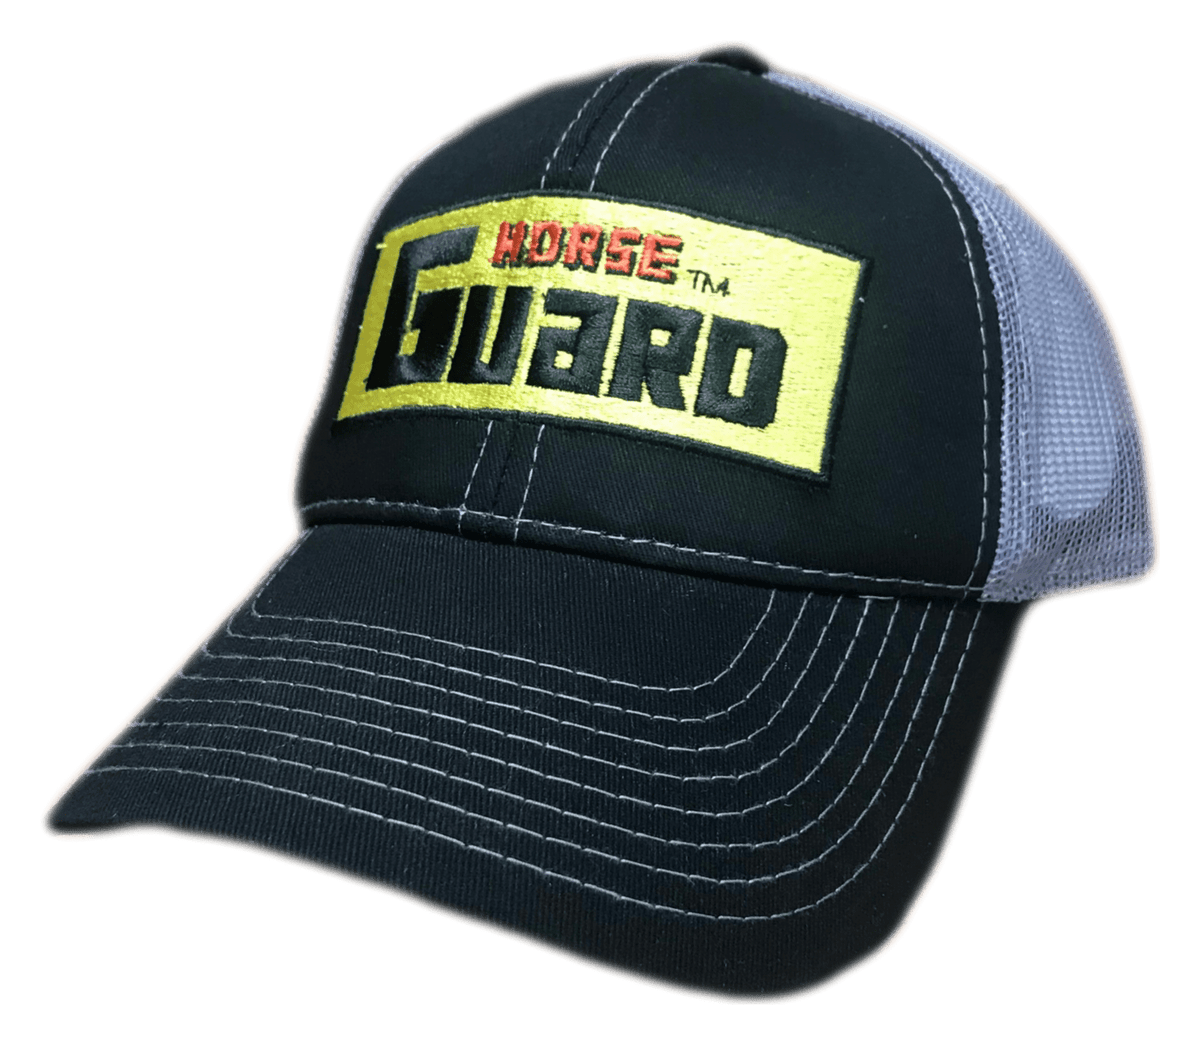 Black Grey Hat by Horse Guard